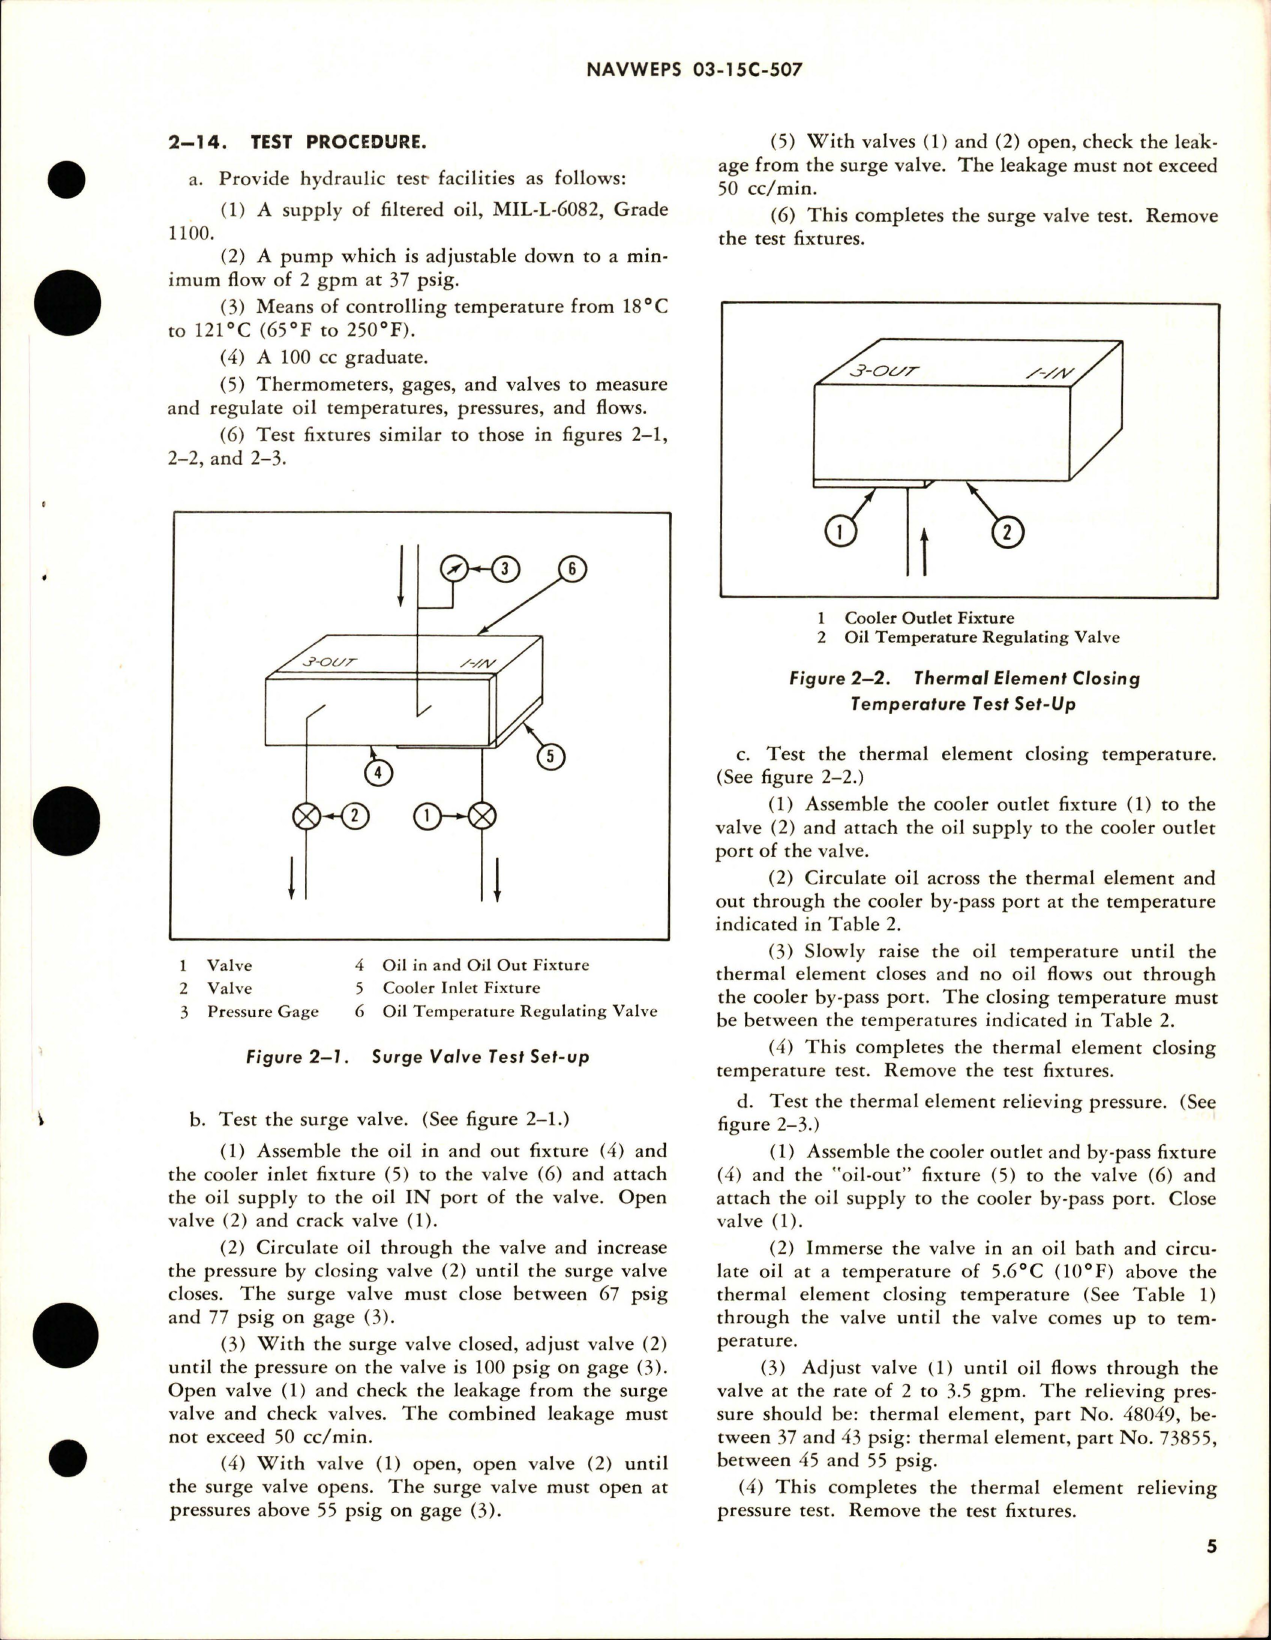 Sample page 5 from AirCorps Library document: Operation, Service and Overhaul Instructions with Parts Catalog for Oil Cooler Valve - Model 46800